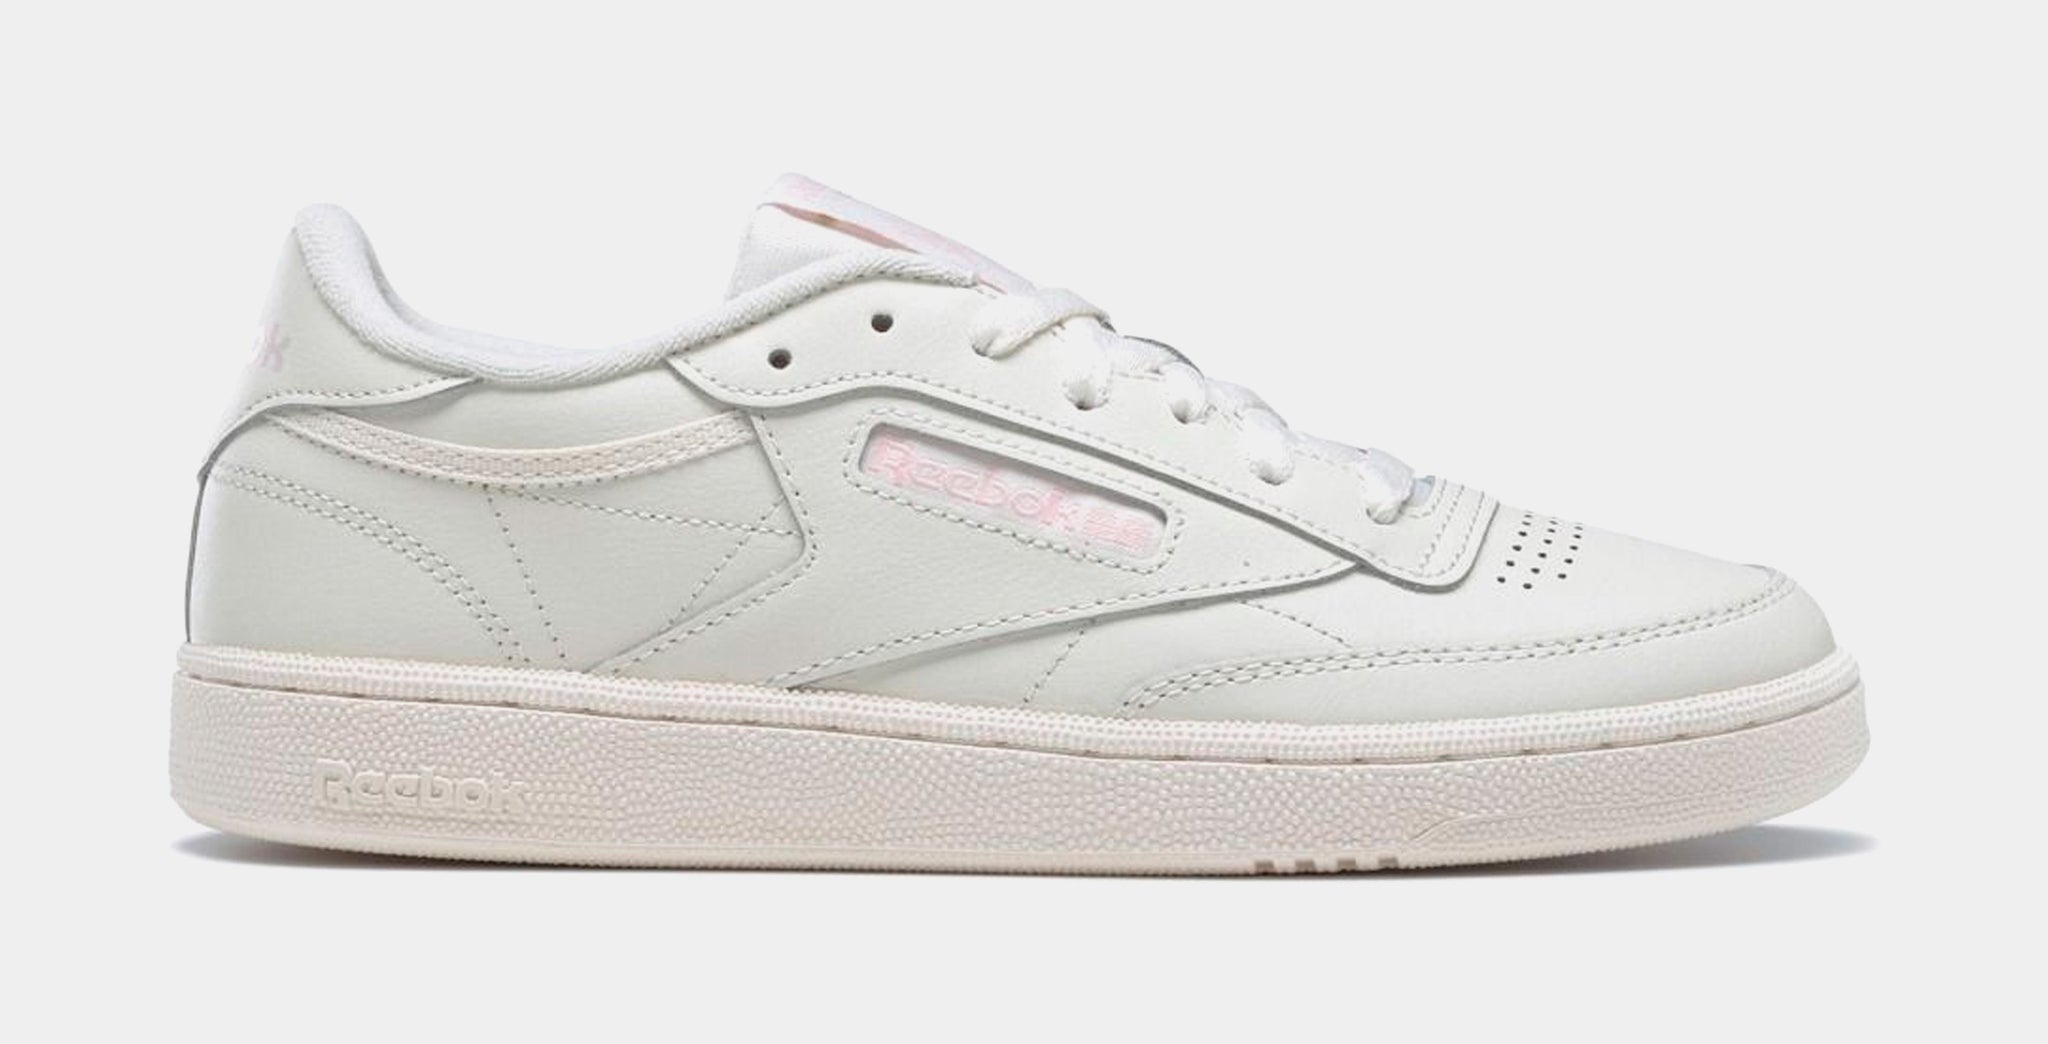 Reebok Club C 85 Trainers In White And Silver for Women